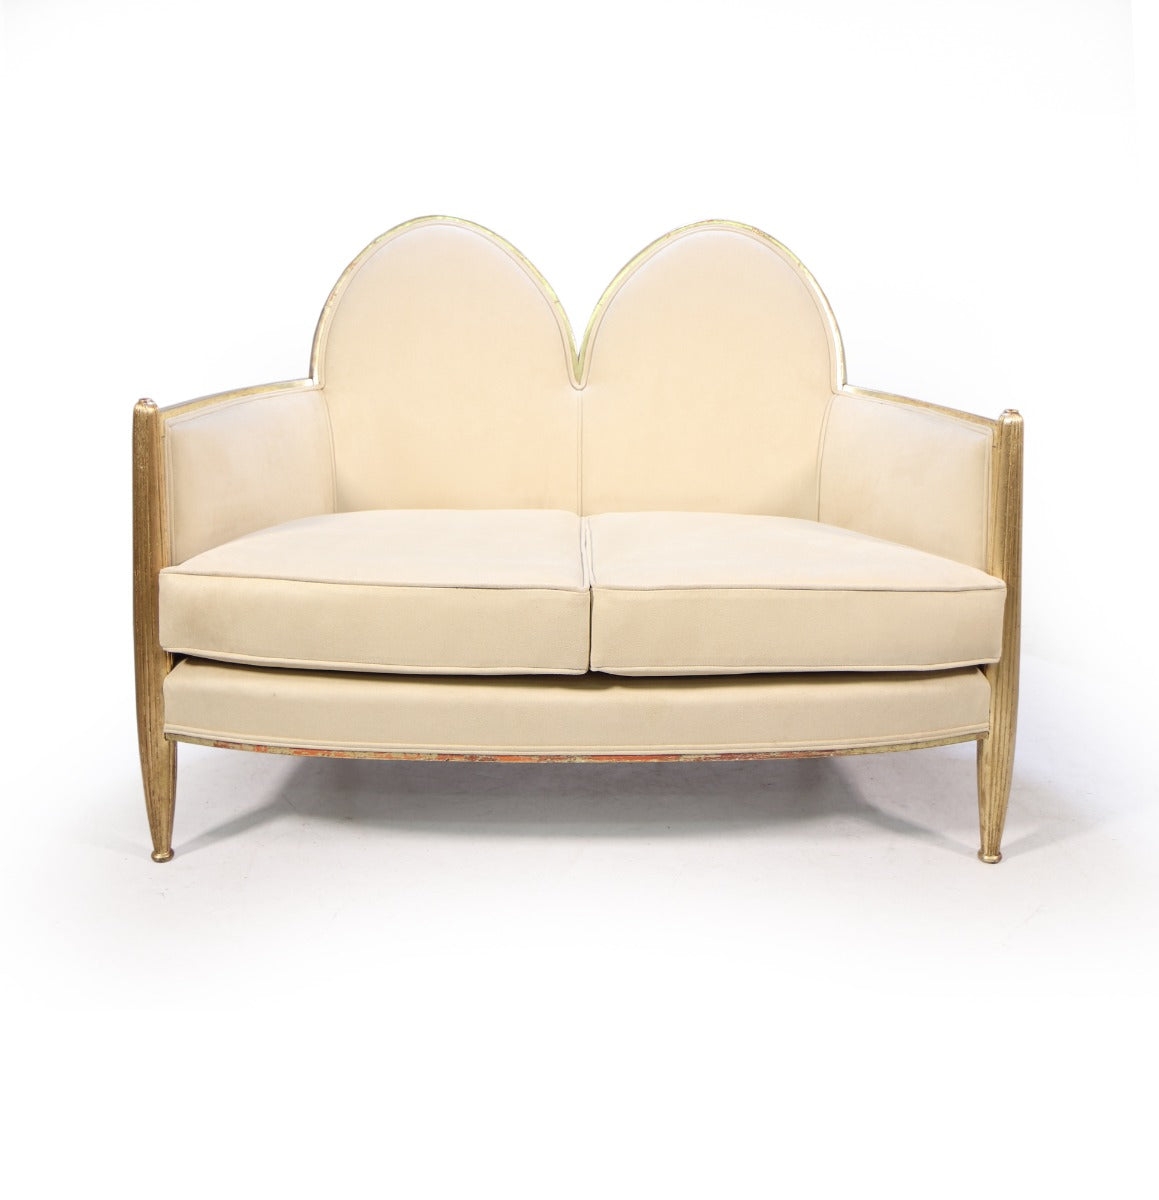 French Art Deco Sofa in Parcel Gilt wood – The Furniture Rooms